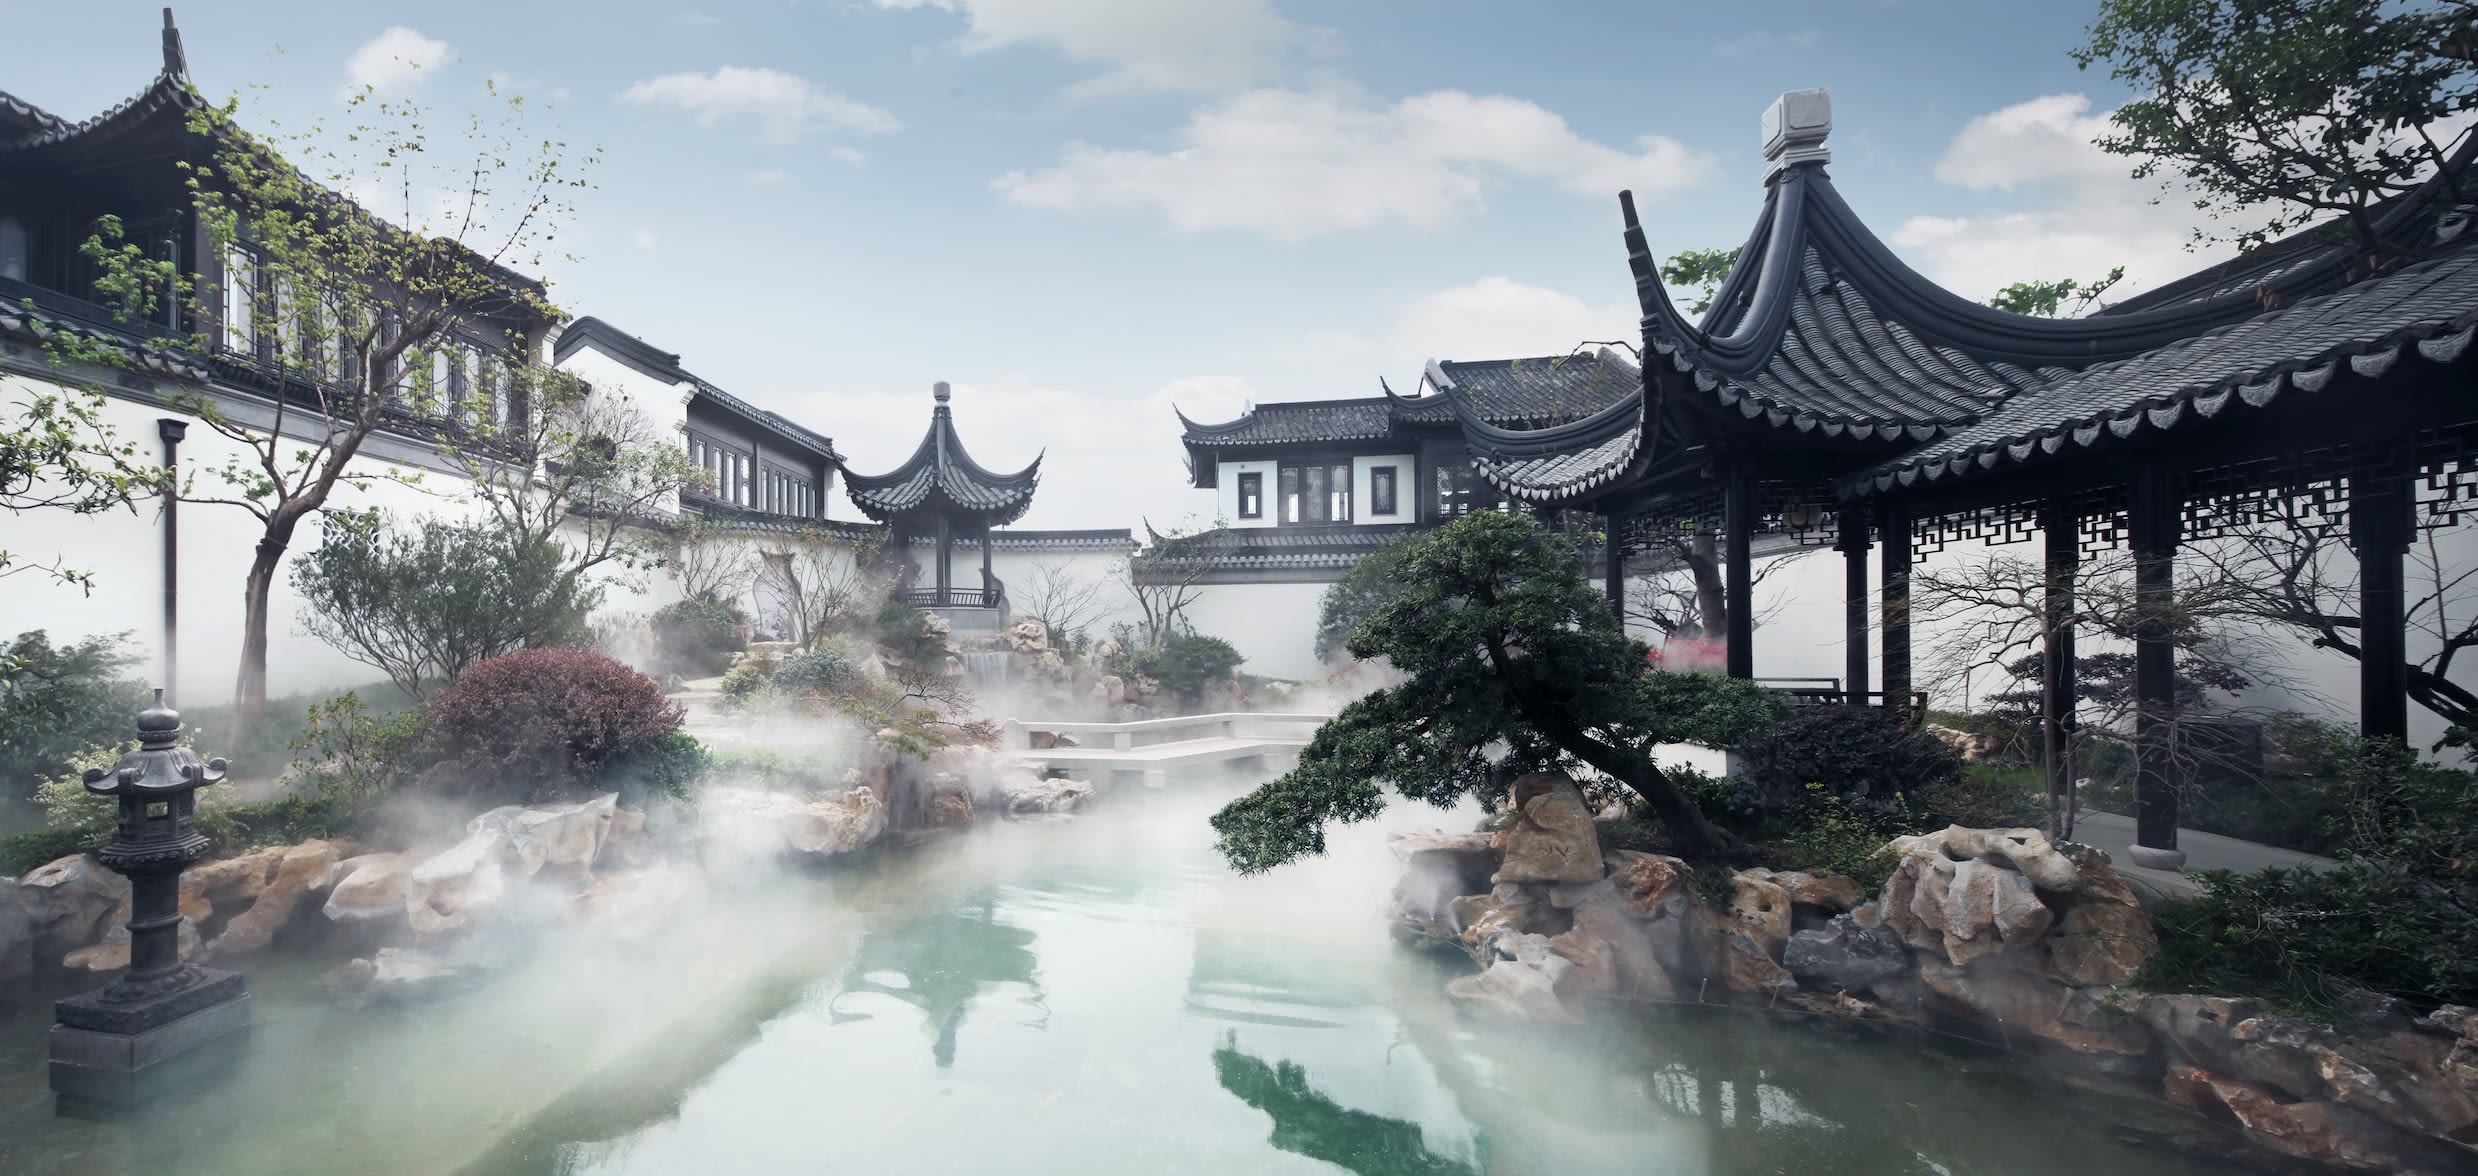 Feel like an emperor in these traditional Chinese homes